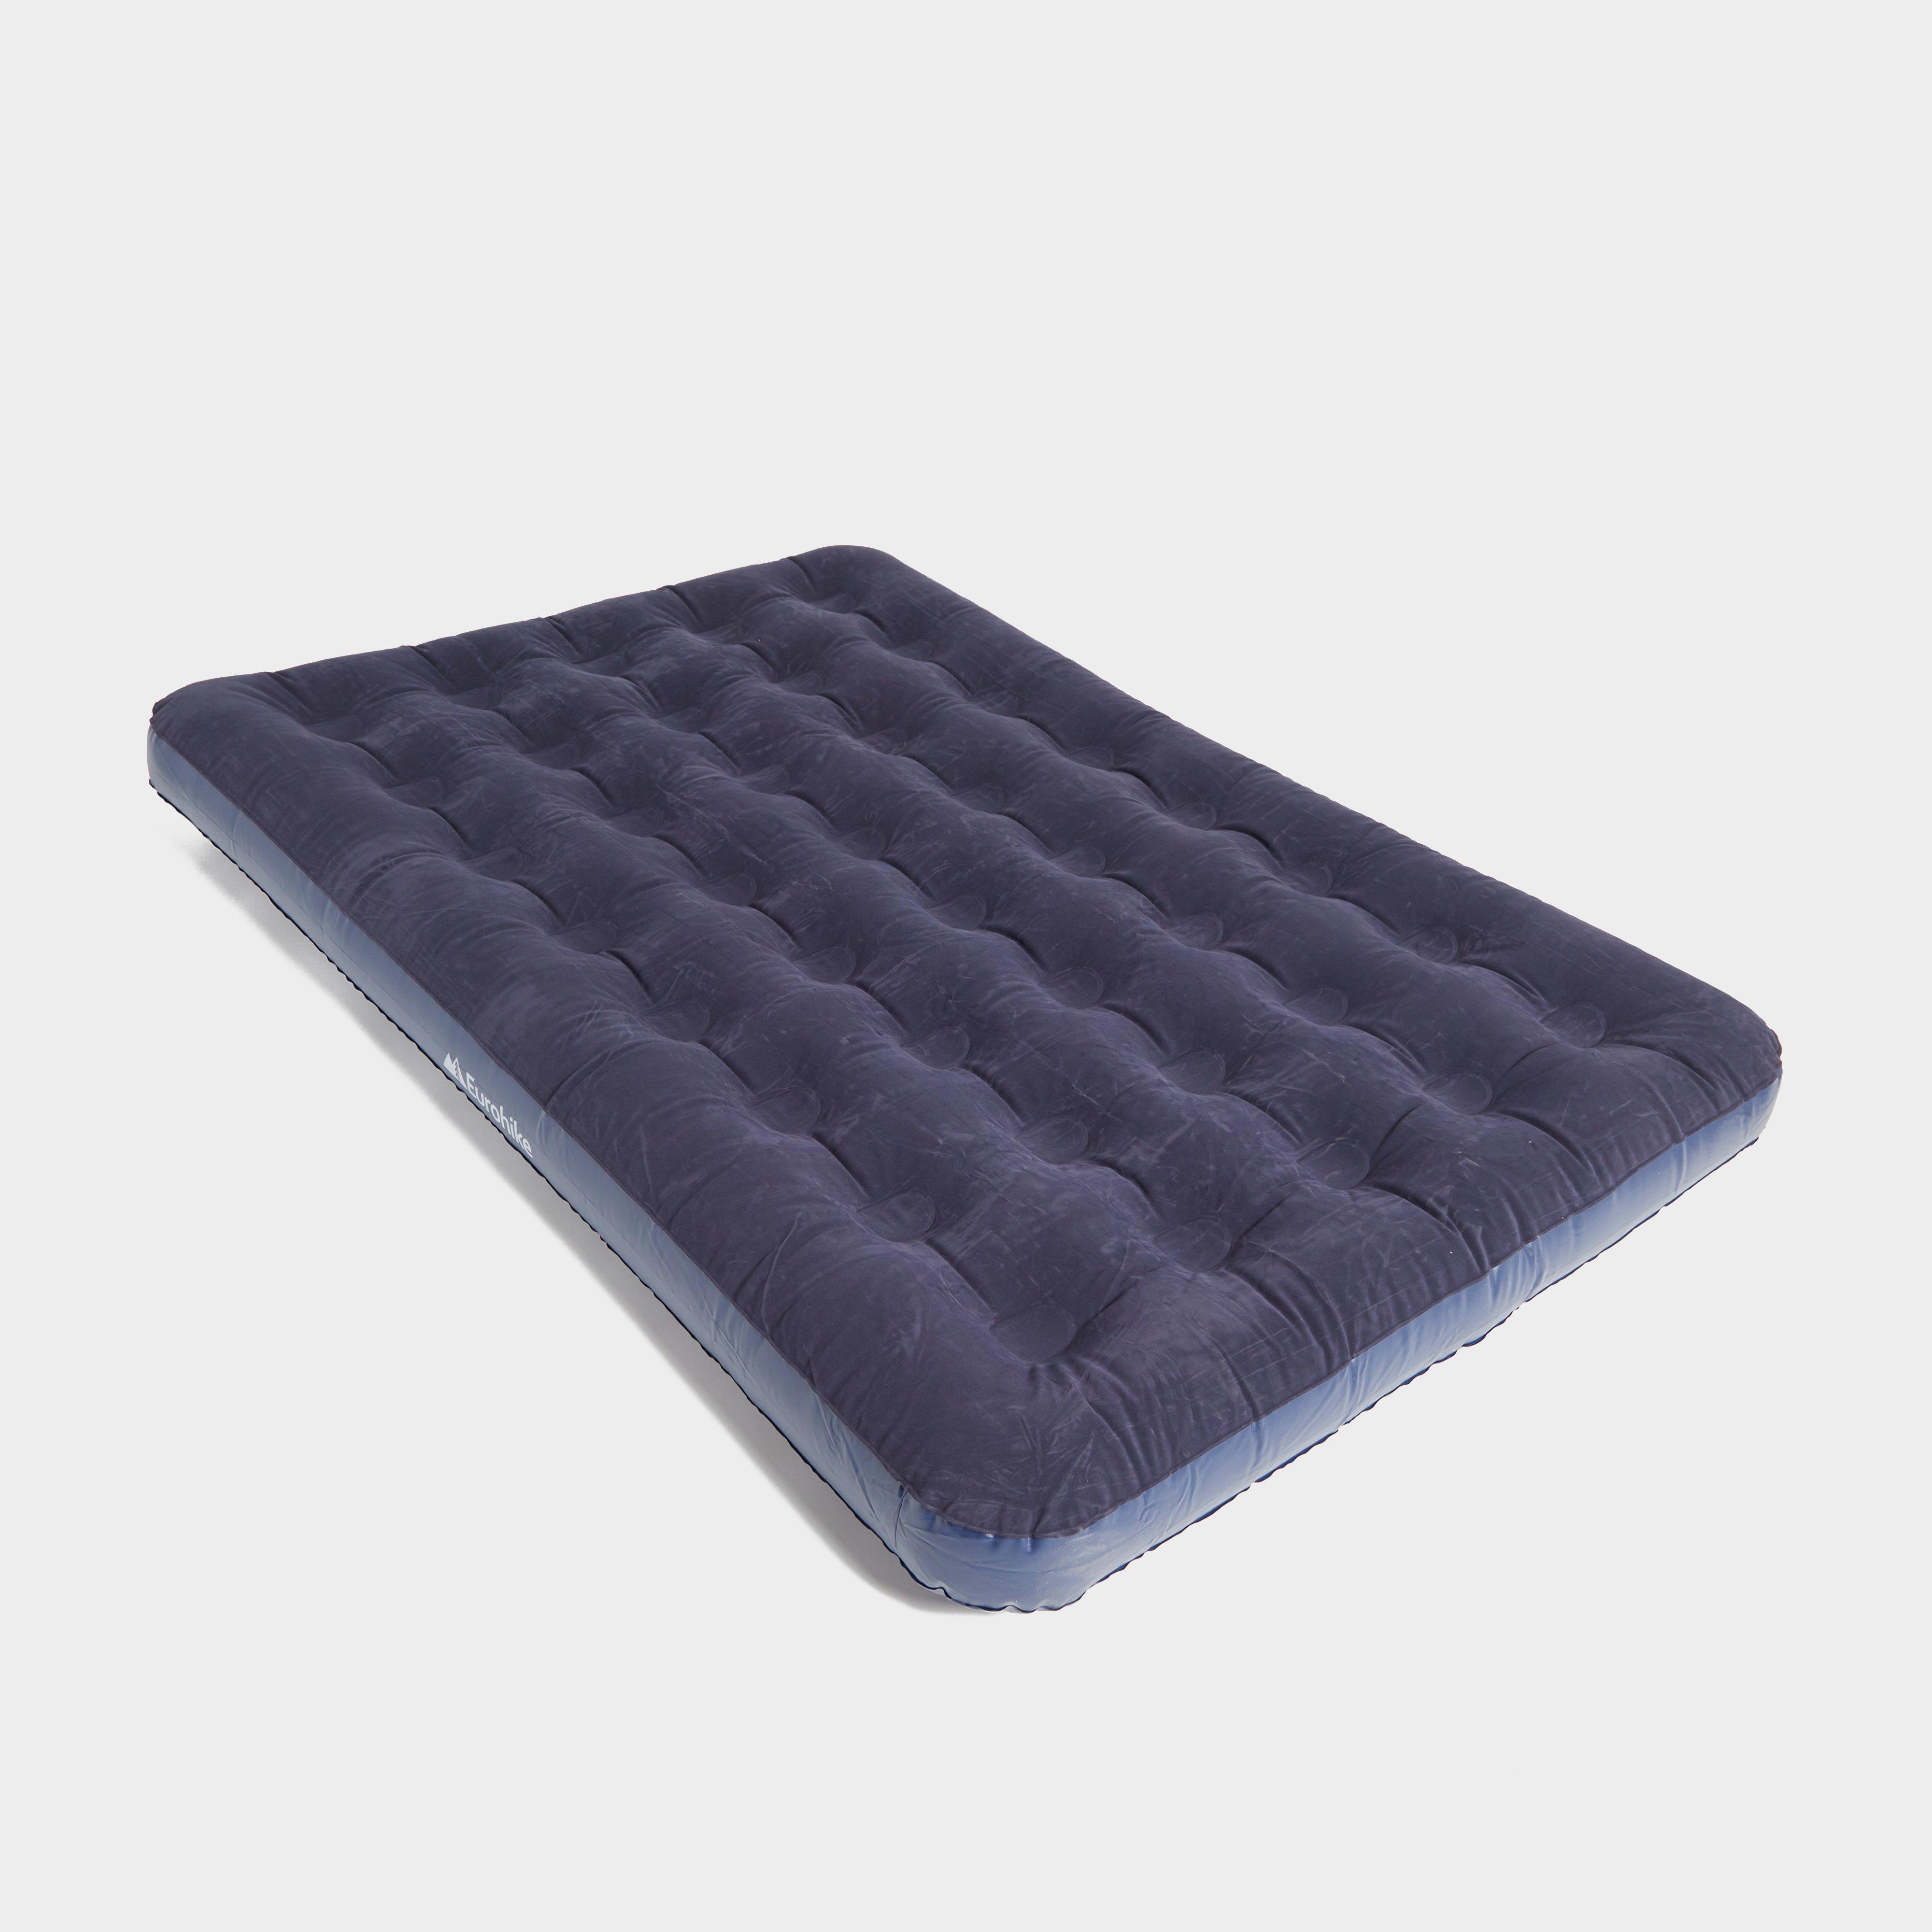 Eurohike Flocked Airbed Double - Navy/nvy  Navy/nvy